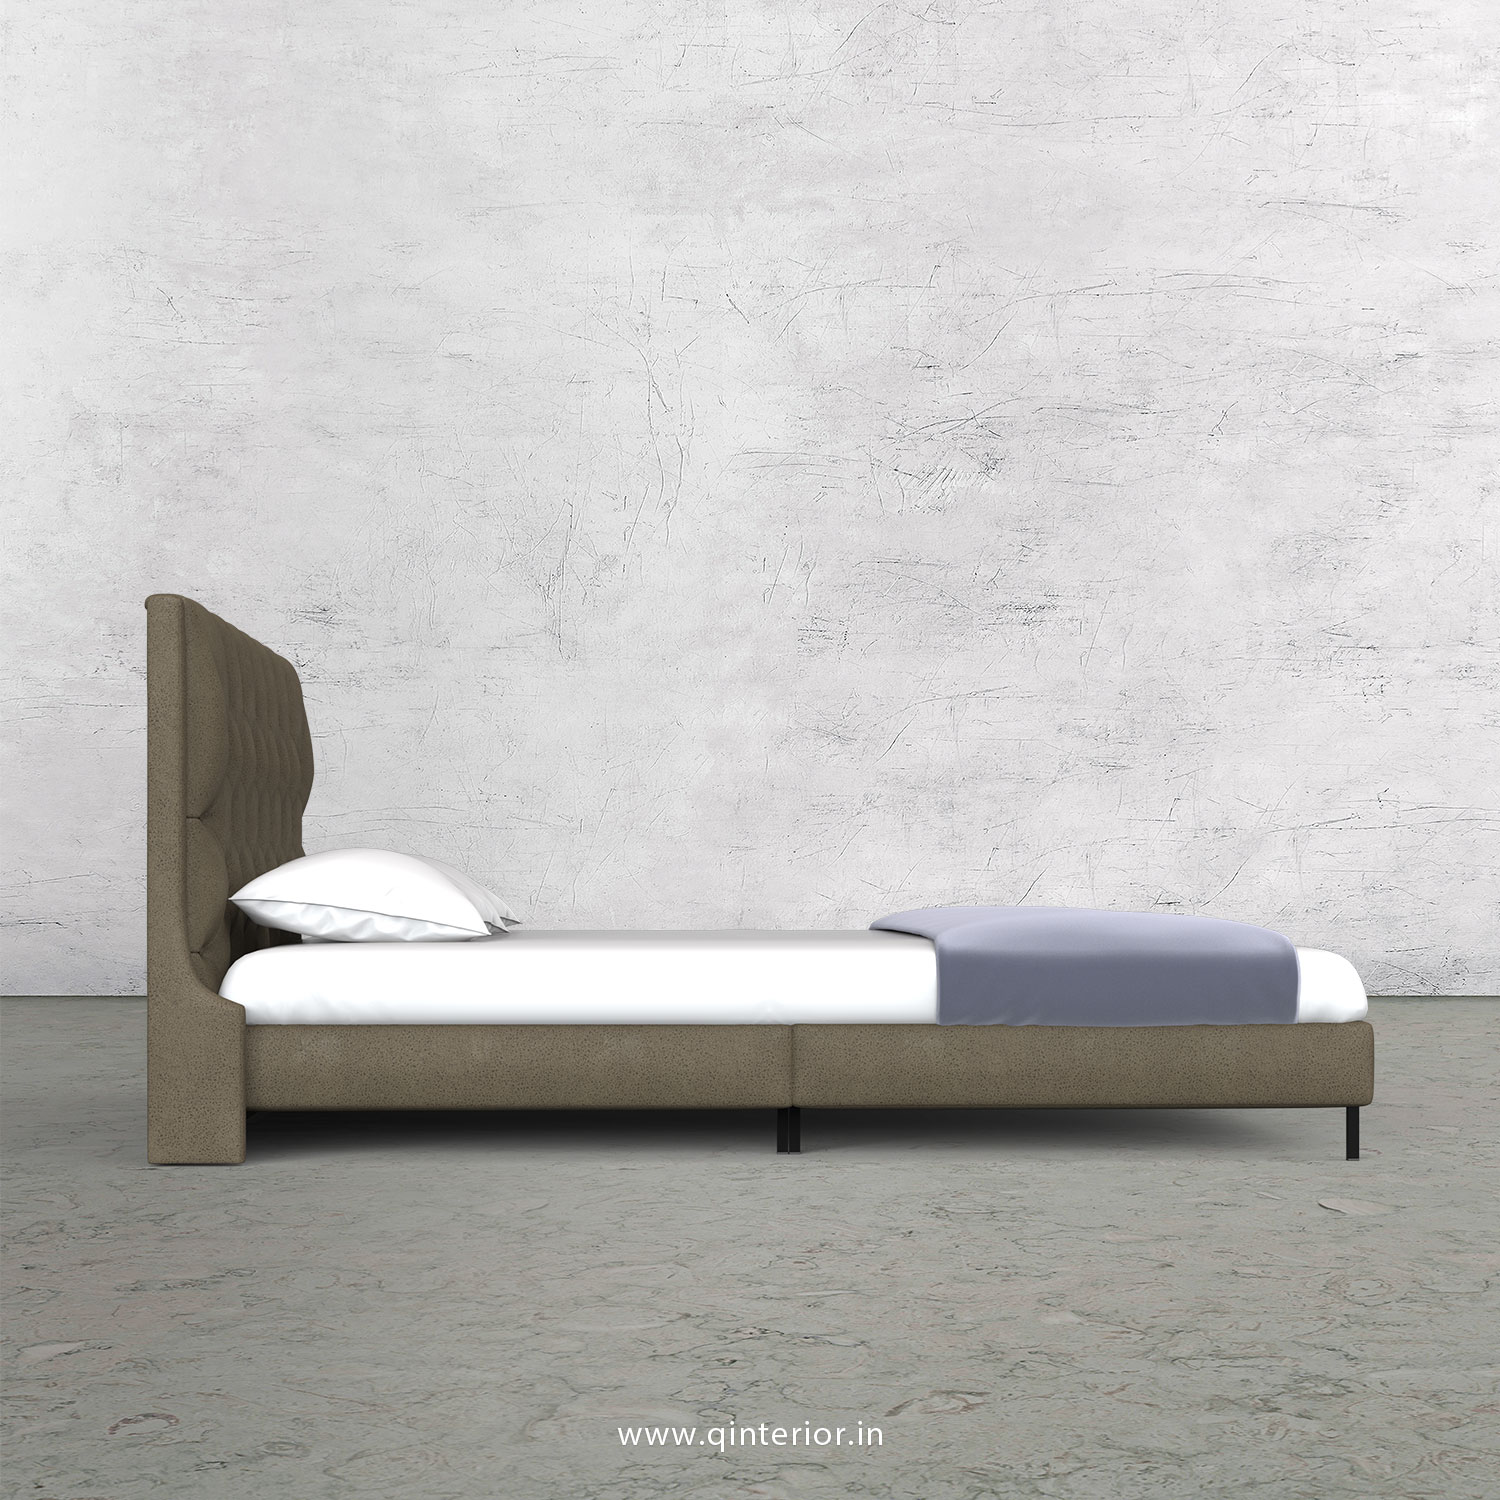 Scorpius King Size Bed in Fab Leather Fabric - KBD003 FL06